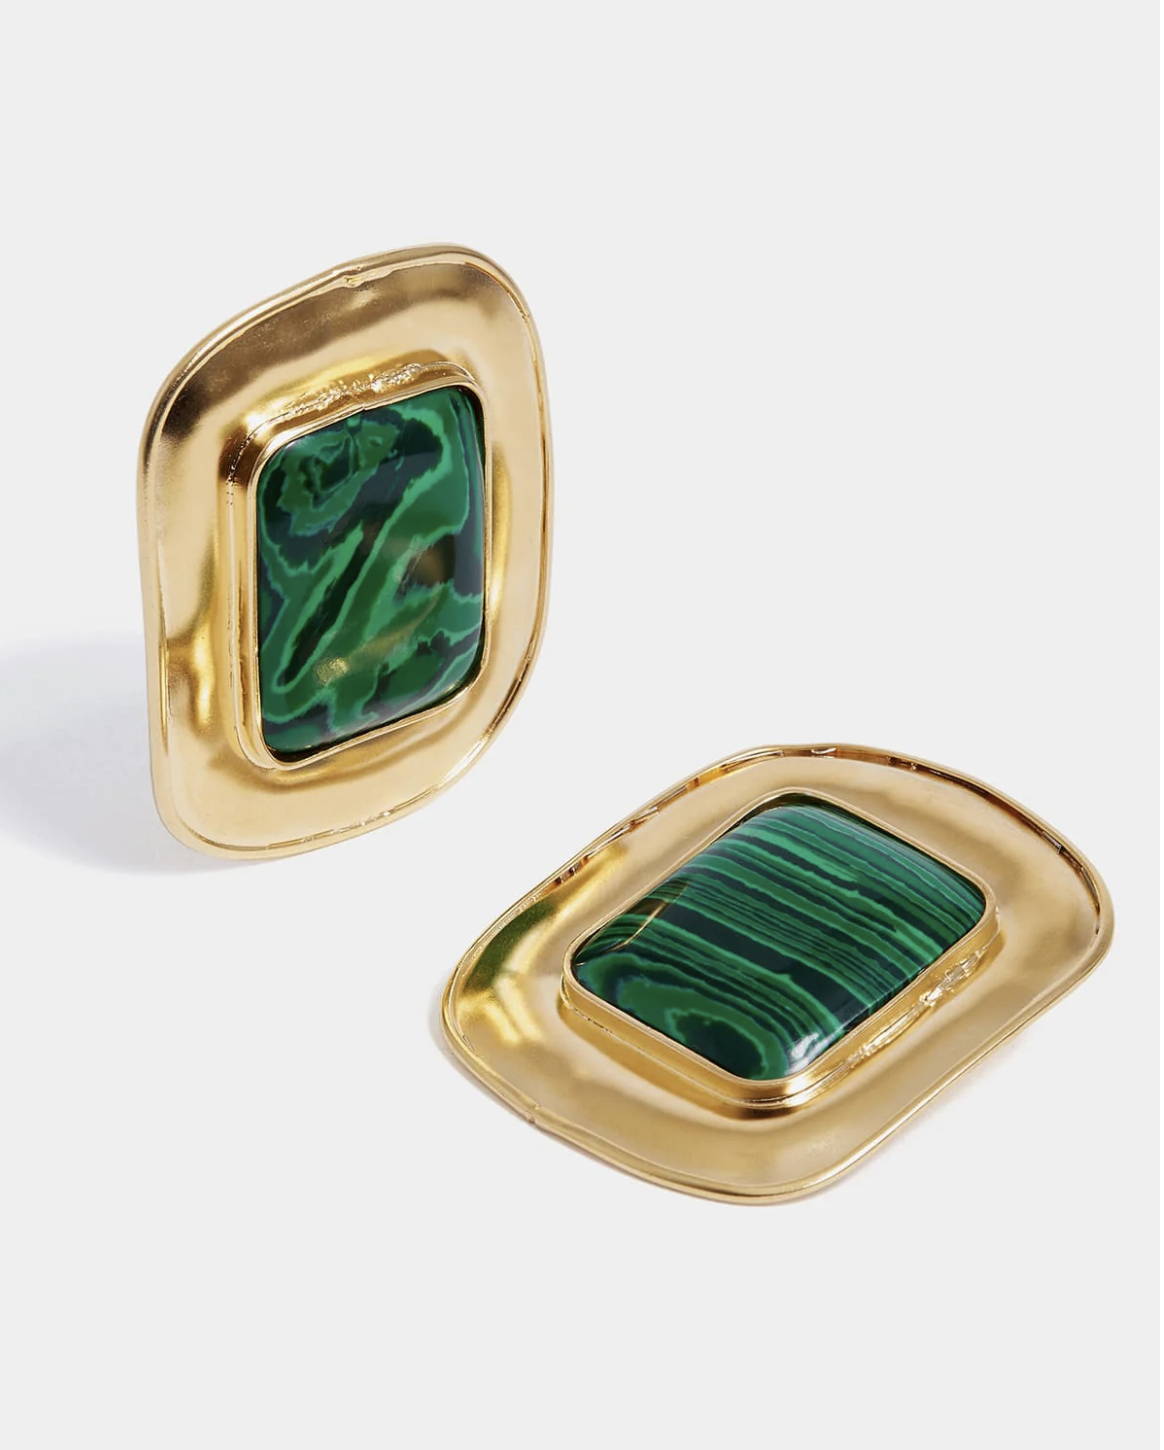 SORU JEWELLERY ARIELLE CHARNAS ESME GREEN EARRINGS SORU X SOMETHING NAVY ARIELLE CHARNAS GREEN MALACHITE ESME EARRINGS 18ct gold plated solid silver and malachite paste